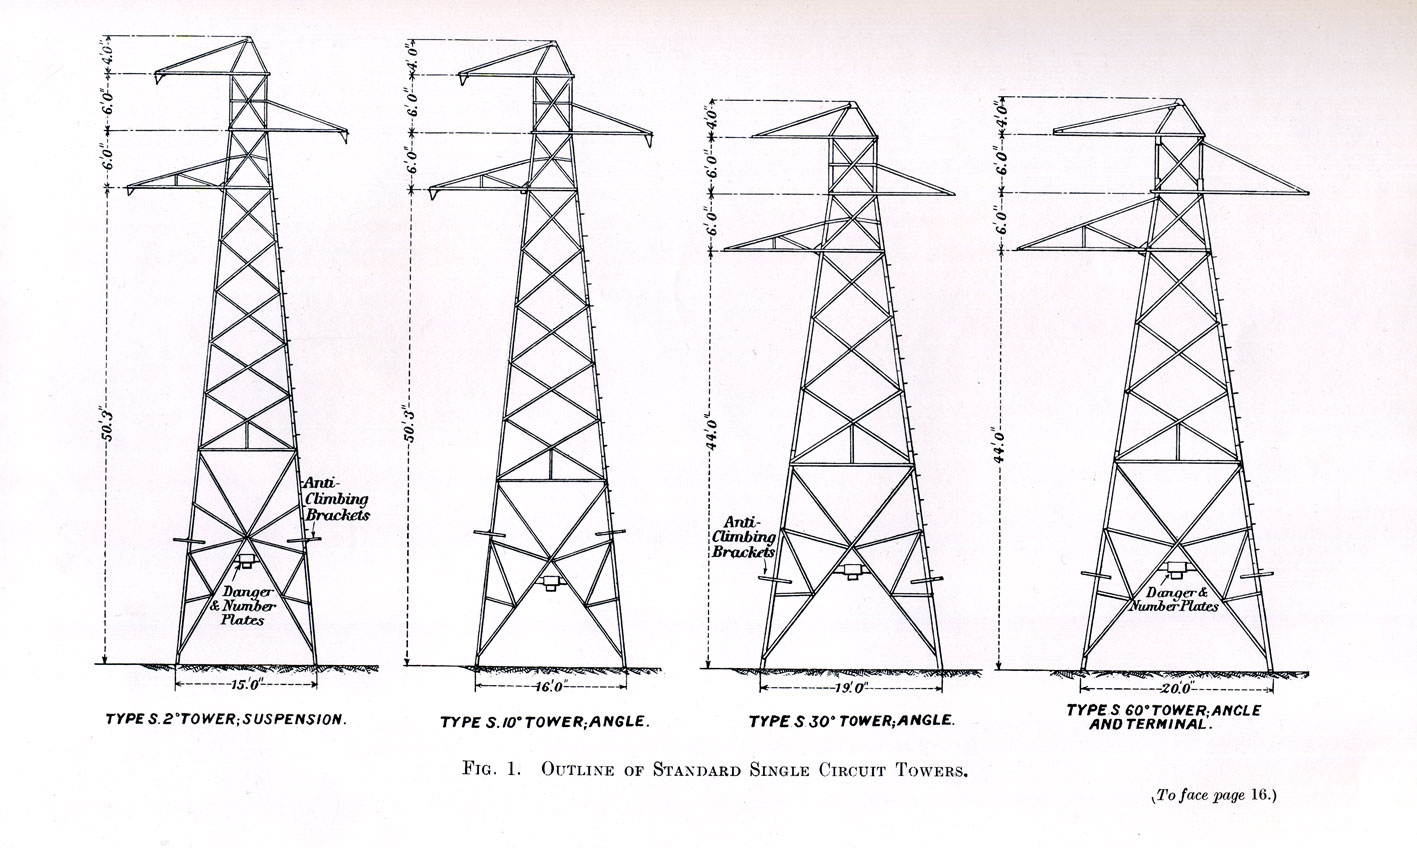 Annual Report of the CEB 1928 referring to the final design of the pylons